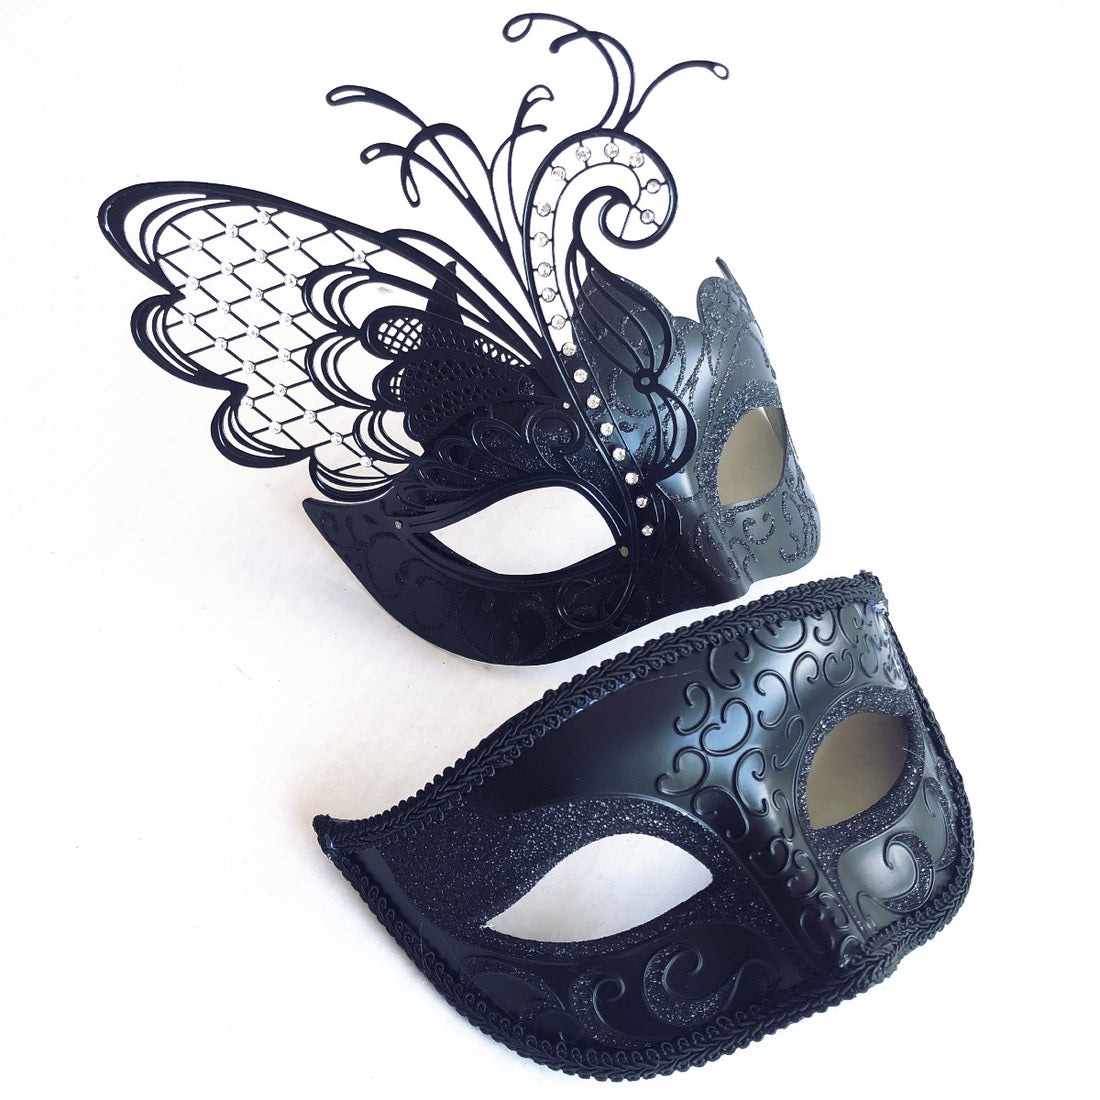 Elegant Venetian Carnival Mask With Feathers Captured In A Dark